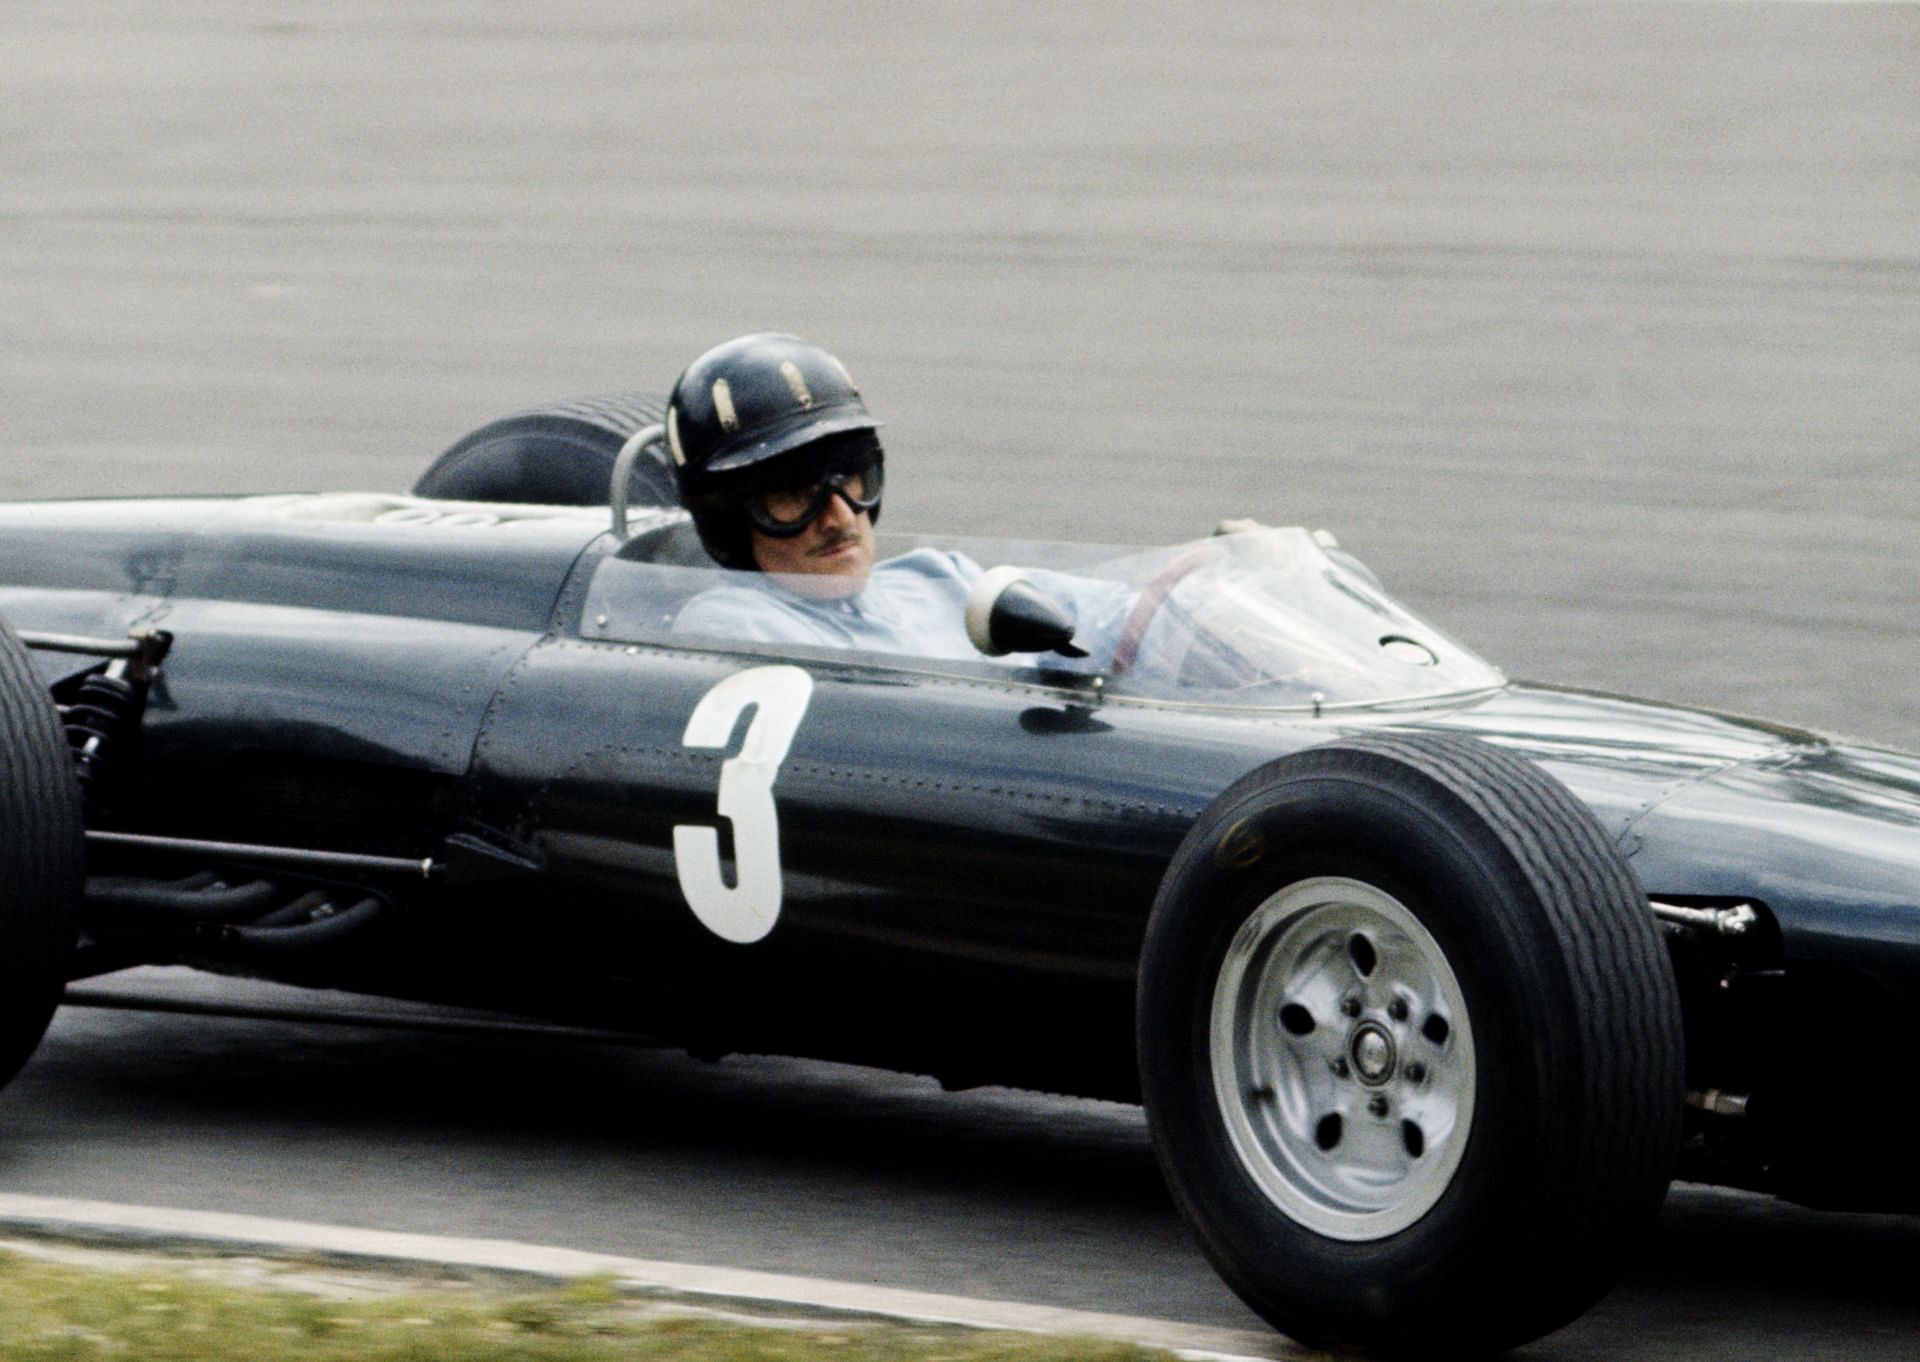 Graham Hill at the Brands Hatch circuit in Fawkham, British Grand Prix 1964 (Photo by Getty Images)